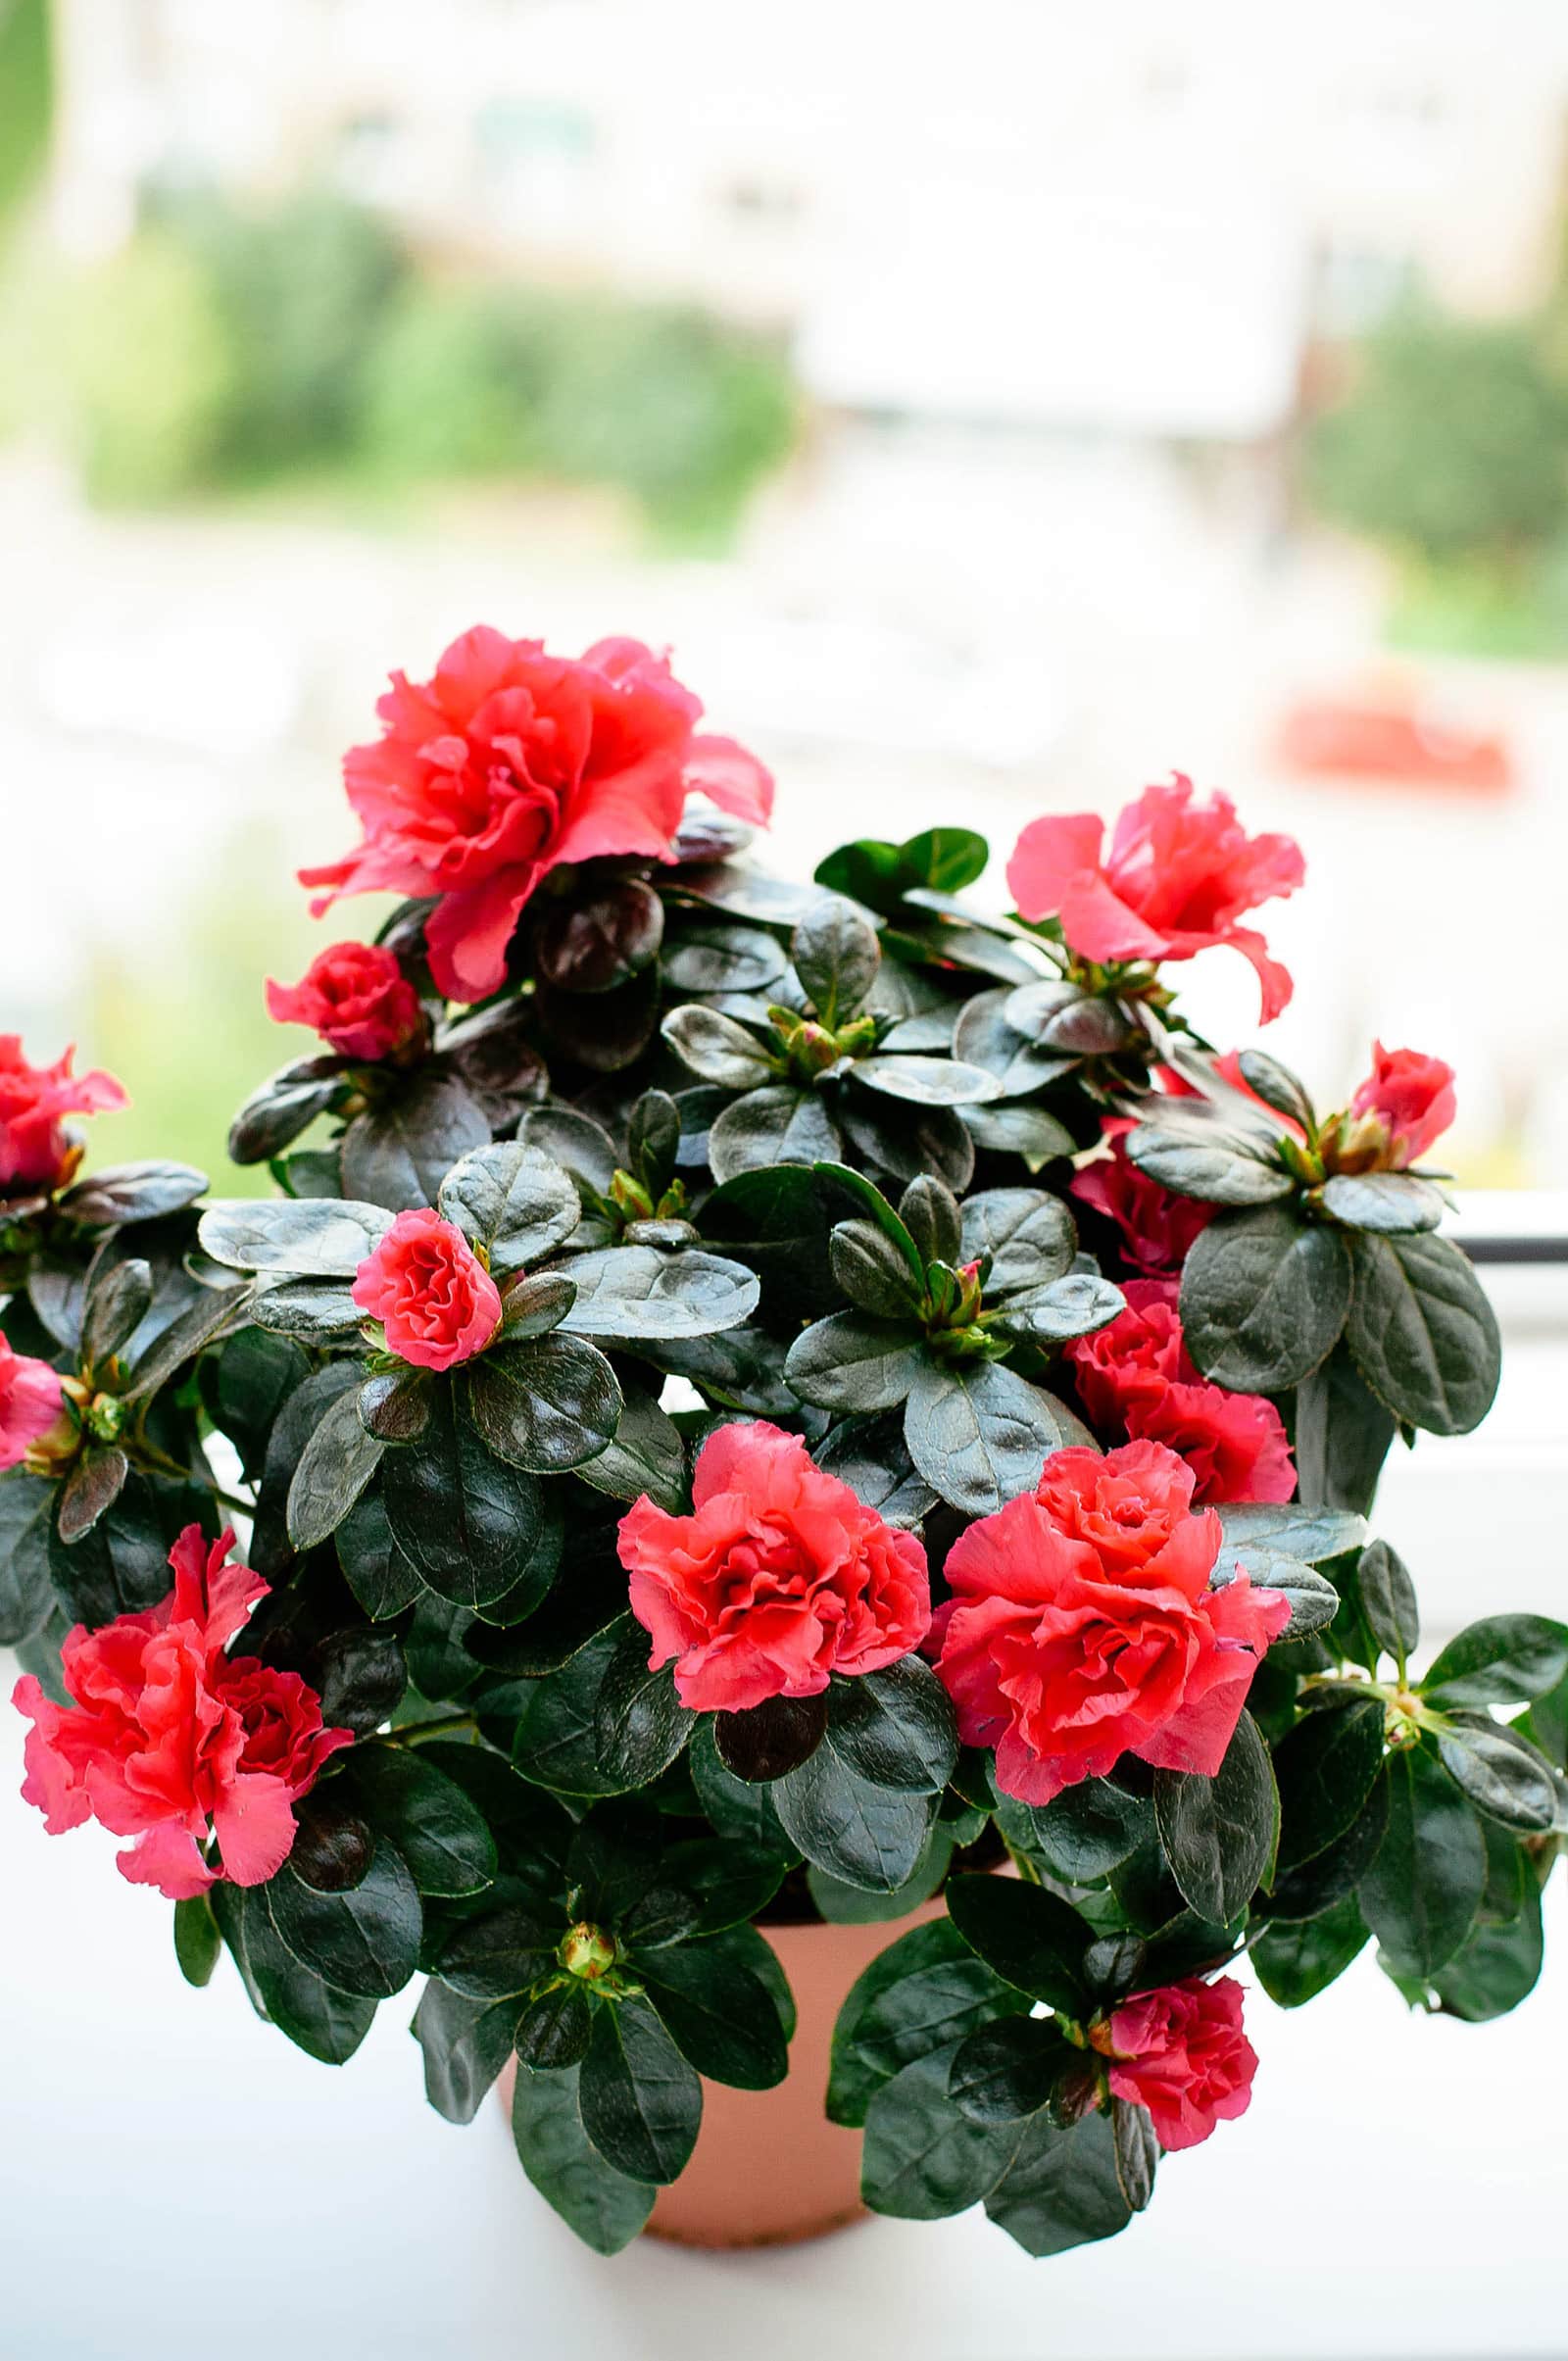 Red azalea plant in bloom with red flowers in a terracotta pot